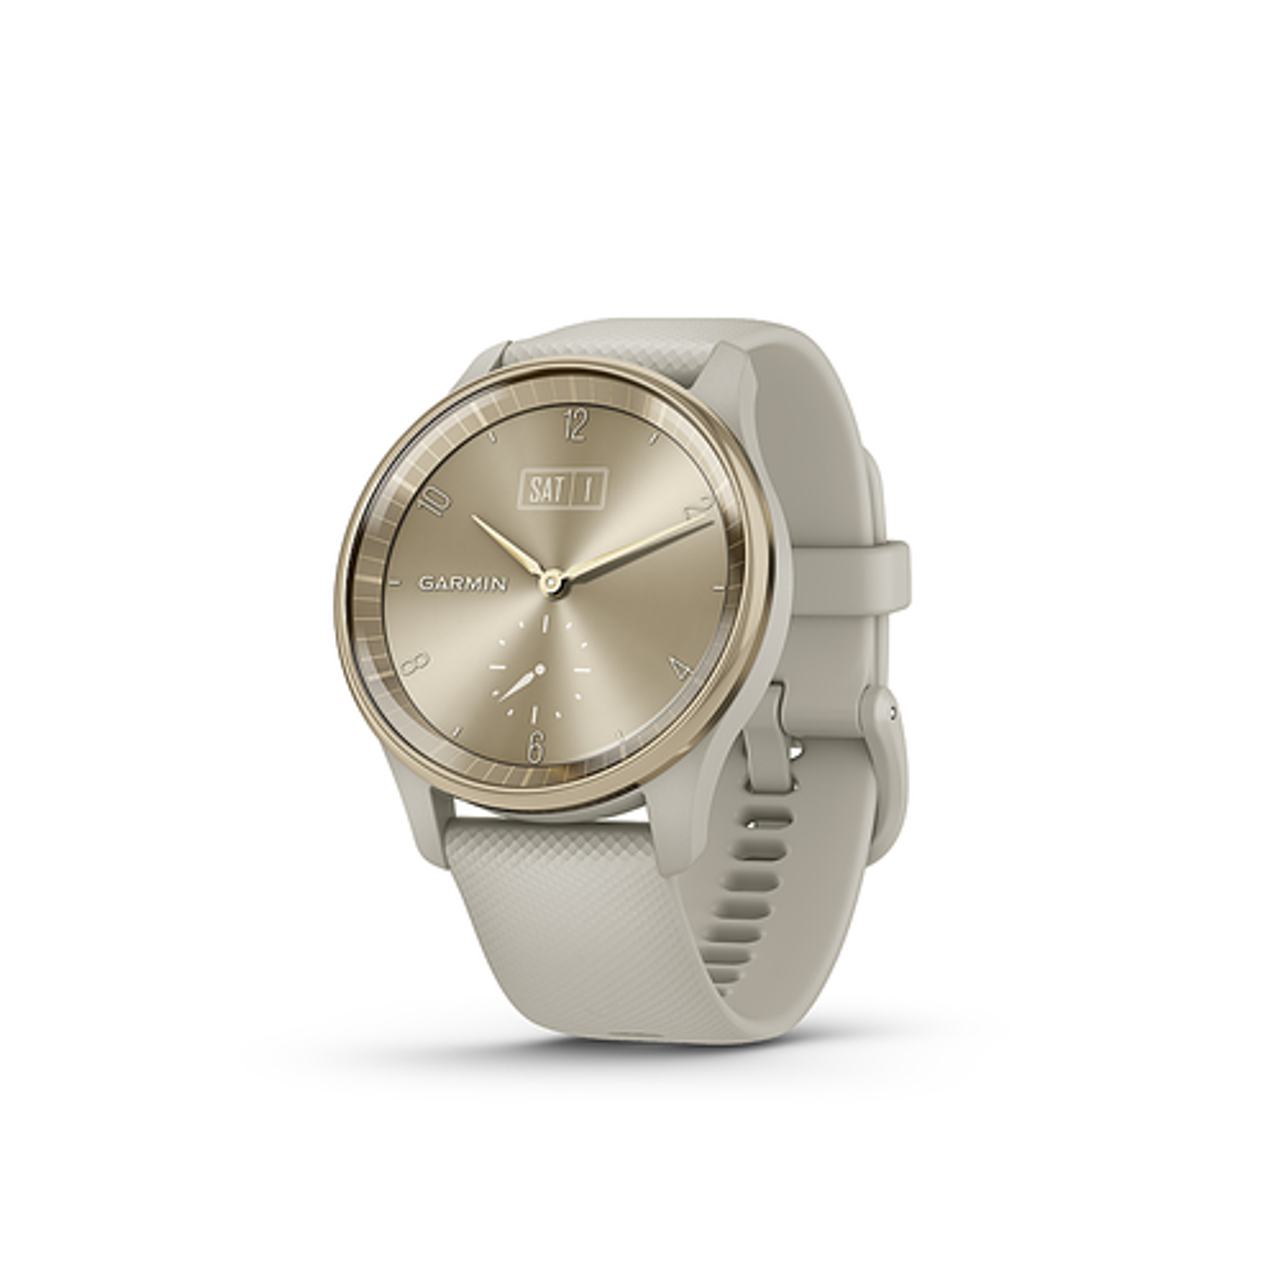 Garmin - vívomove Trend Hybrid Smartwatch 40 mm Fiber-Reinforced Polymer - Cream Gold Stainless Steel with French Gray Band